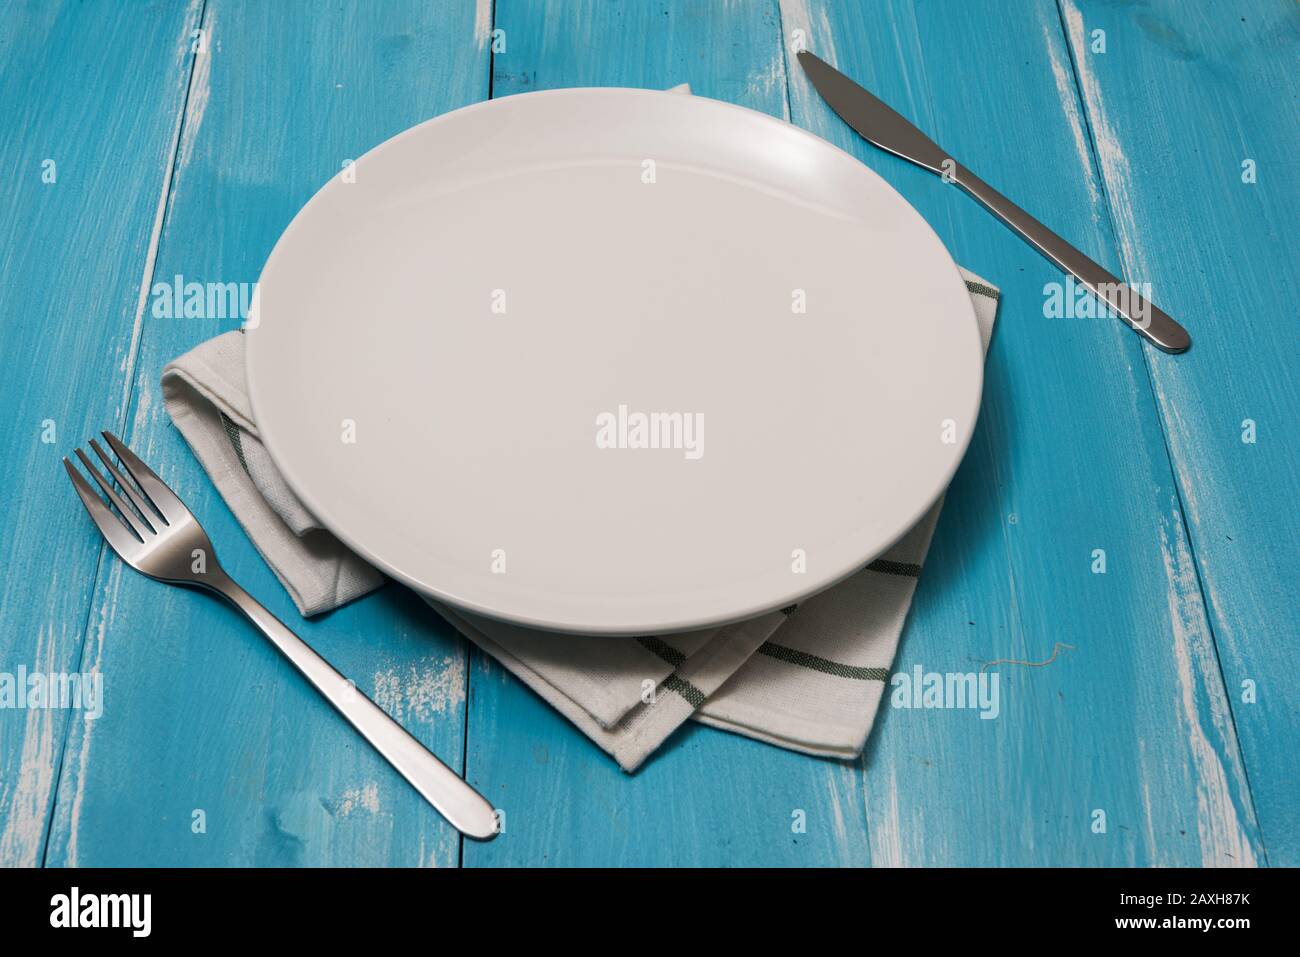 White Round Plate with utensils and dish towel on ocean blue wooden table background with perspective Stock Photo